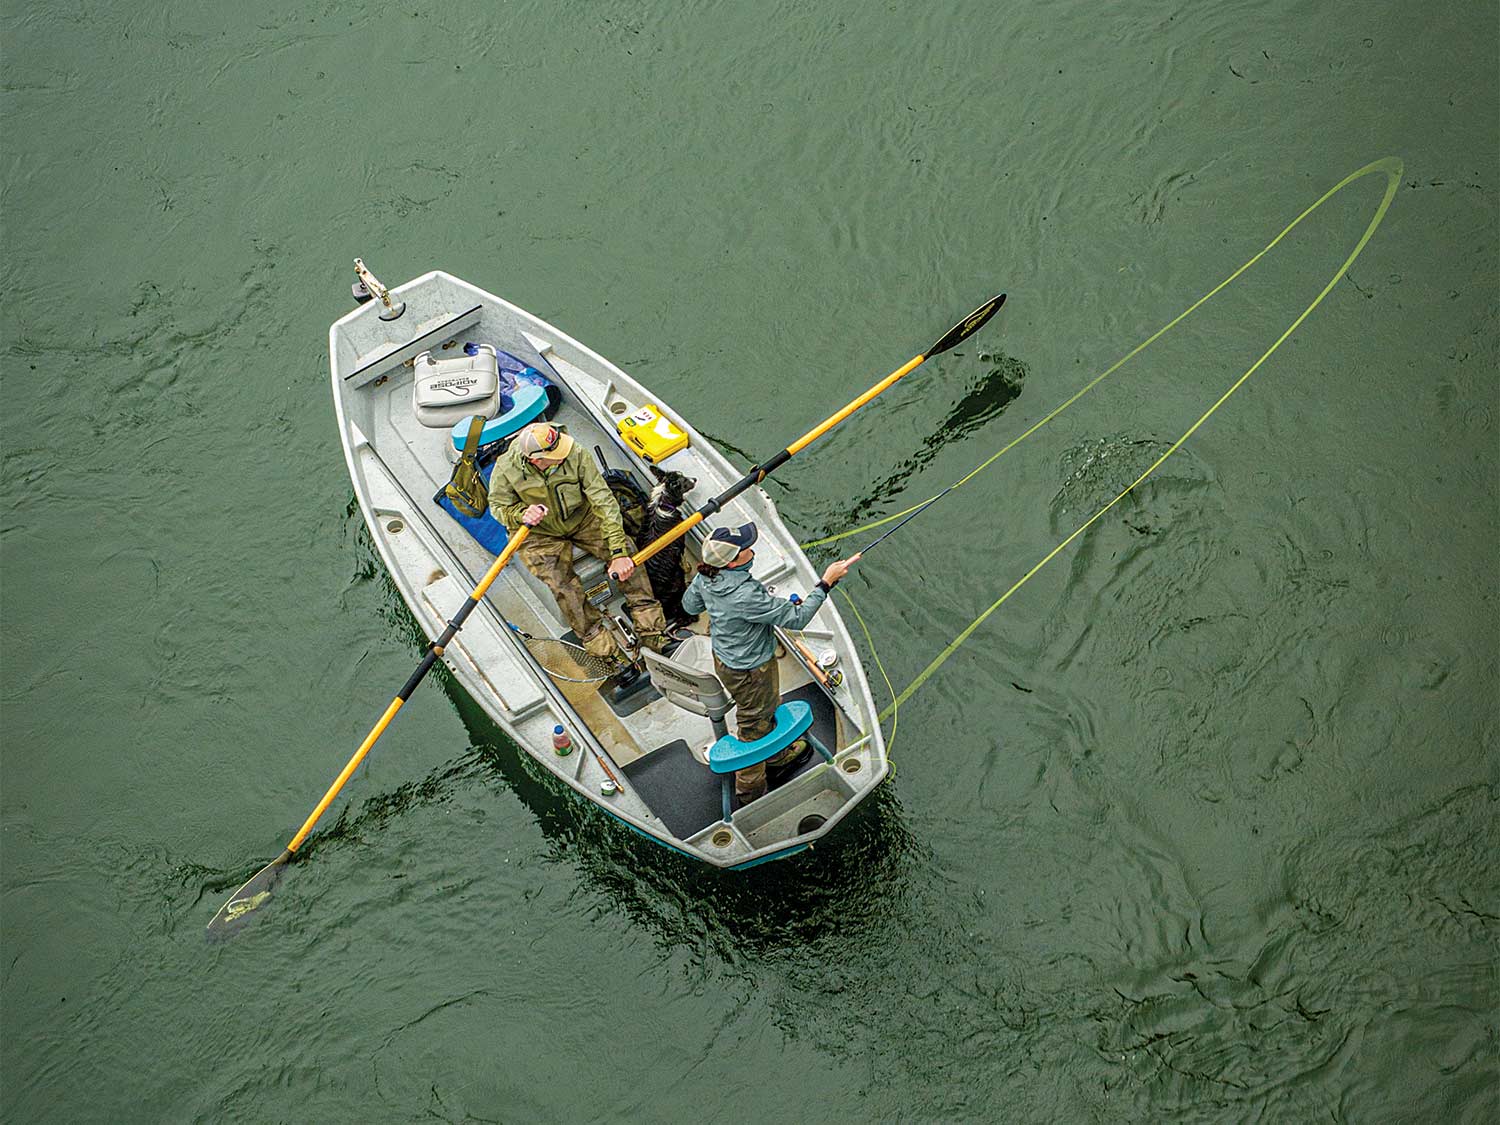 Rowing Tips That Will Help You Catch More Fish (and Keep You from Capsizing)